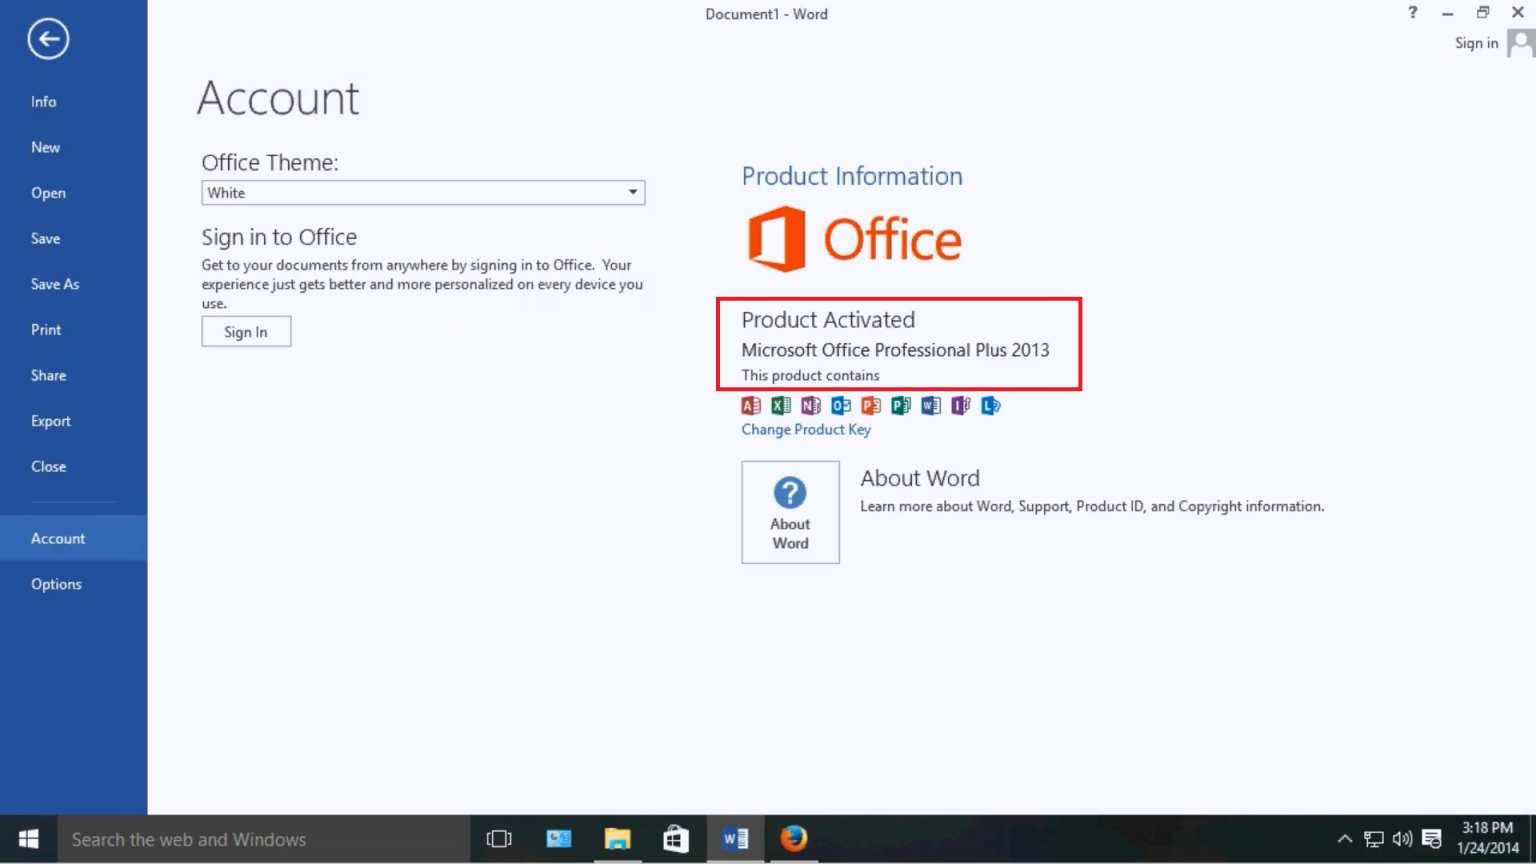 how to activate microsoft word without product key